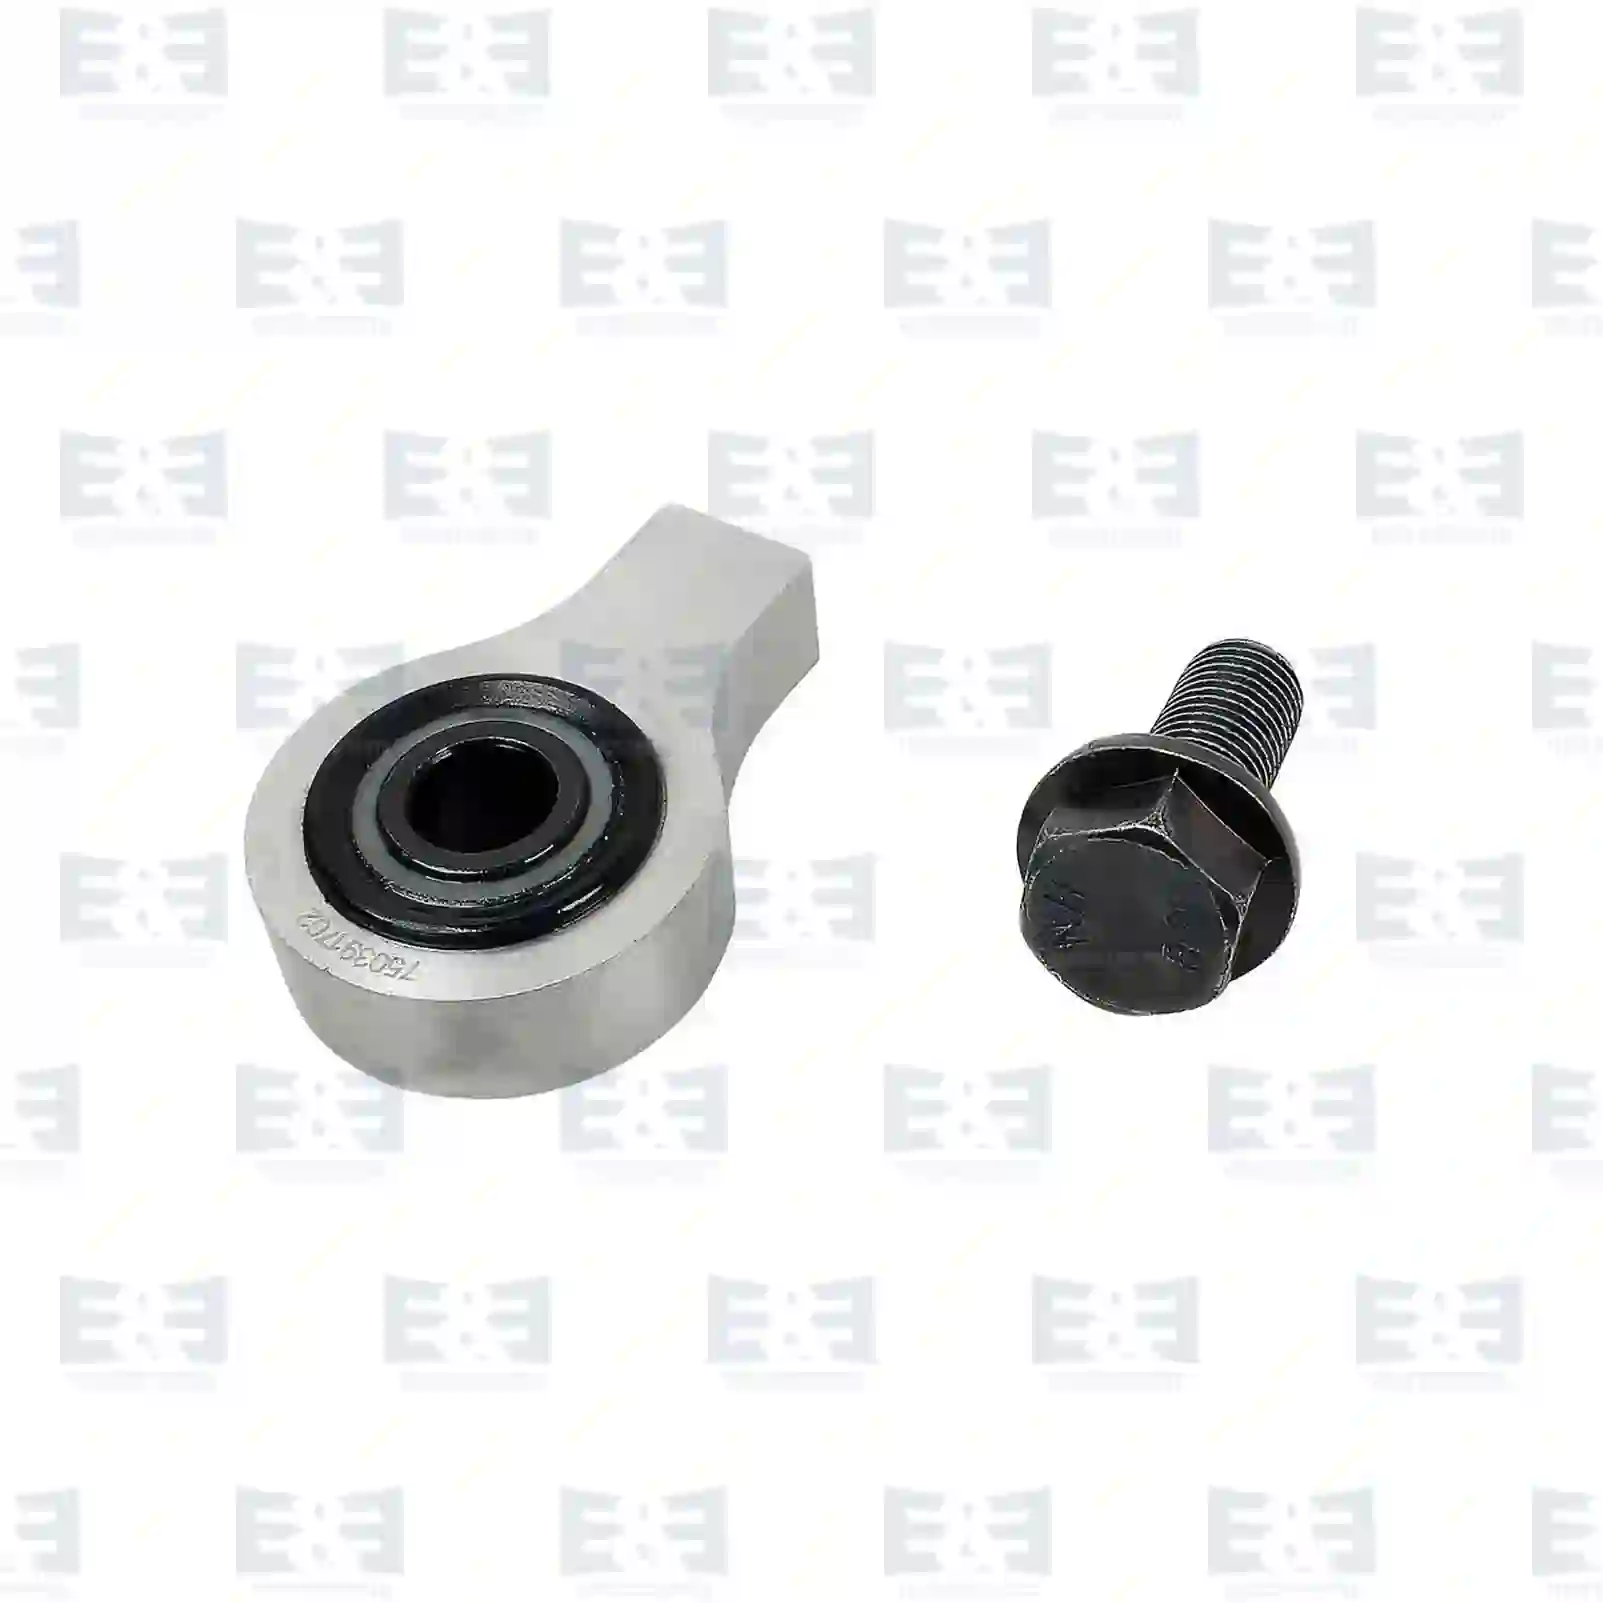 Bearing joint, complete with seal rings, 2E2274905, 2171717 ||  2E2274905 E&E Truck Spare Parts | Truck Spare Parts, Auotomotive Spare Parts Bearing joint, complete with seal rings, 2E2274905, 2171717 ||  2E2274905 E&E Truck Spare Parts | Truck Spare Parts, Auotomotive Spare Parts